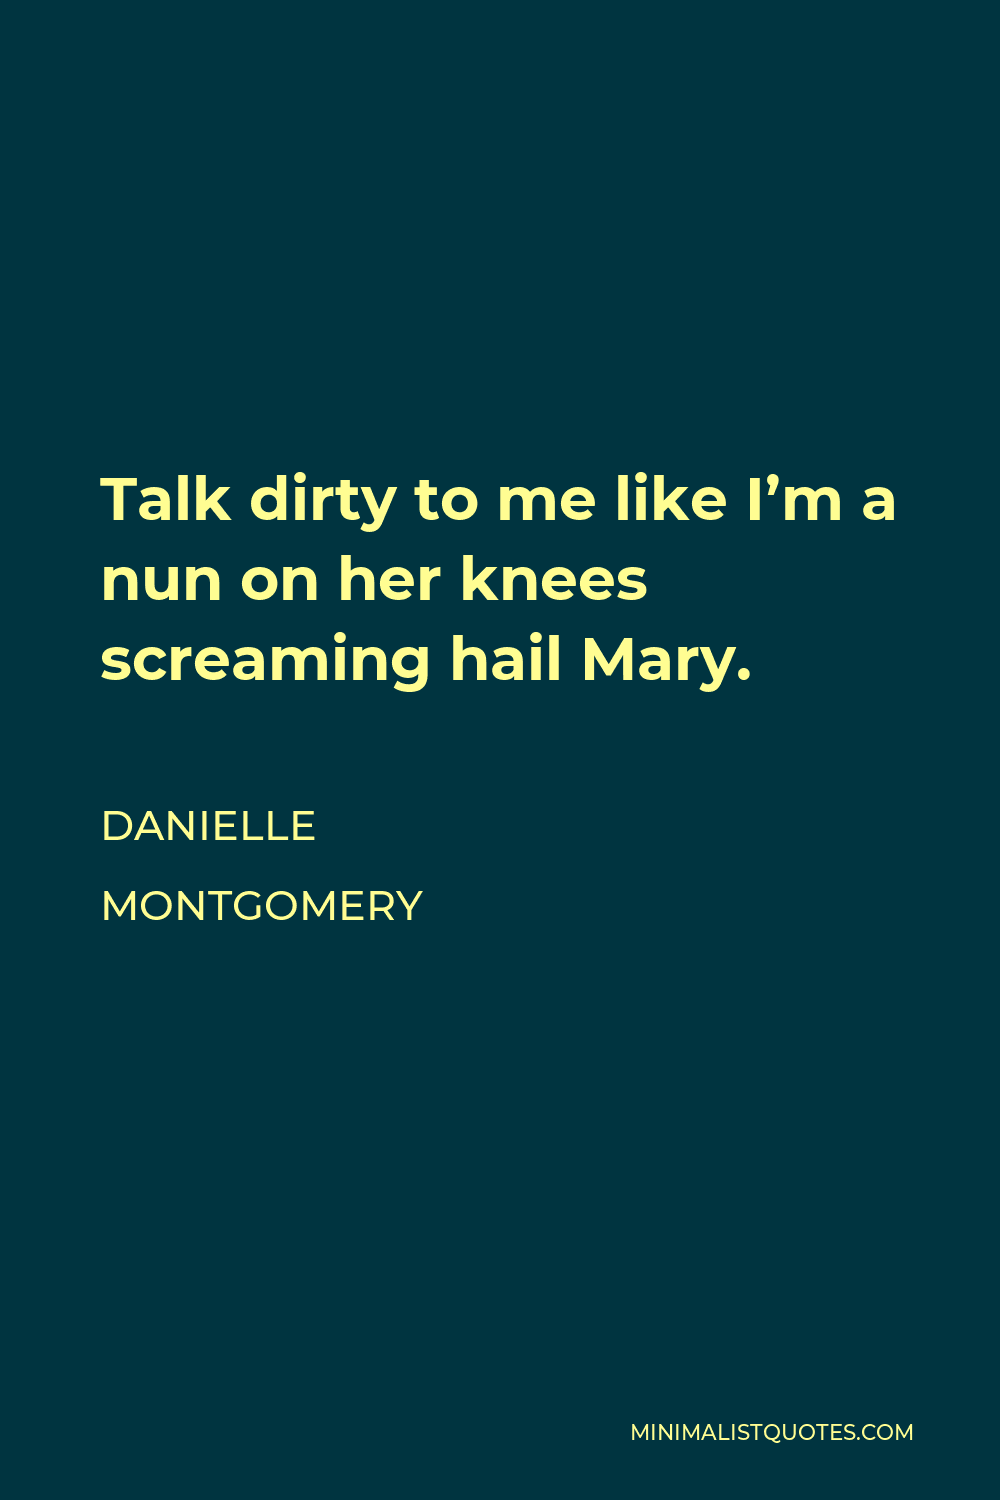 Danielle Montgomery Quote - Talk dirty to me like I’m a nun on her knees screaming hail Mary.